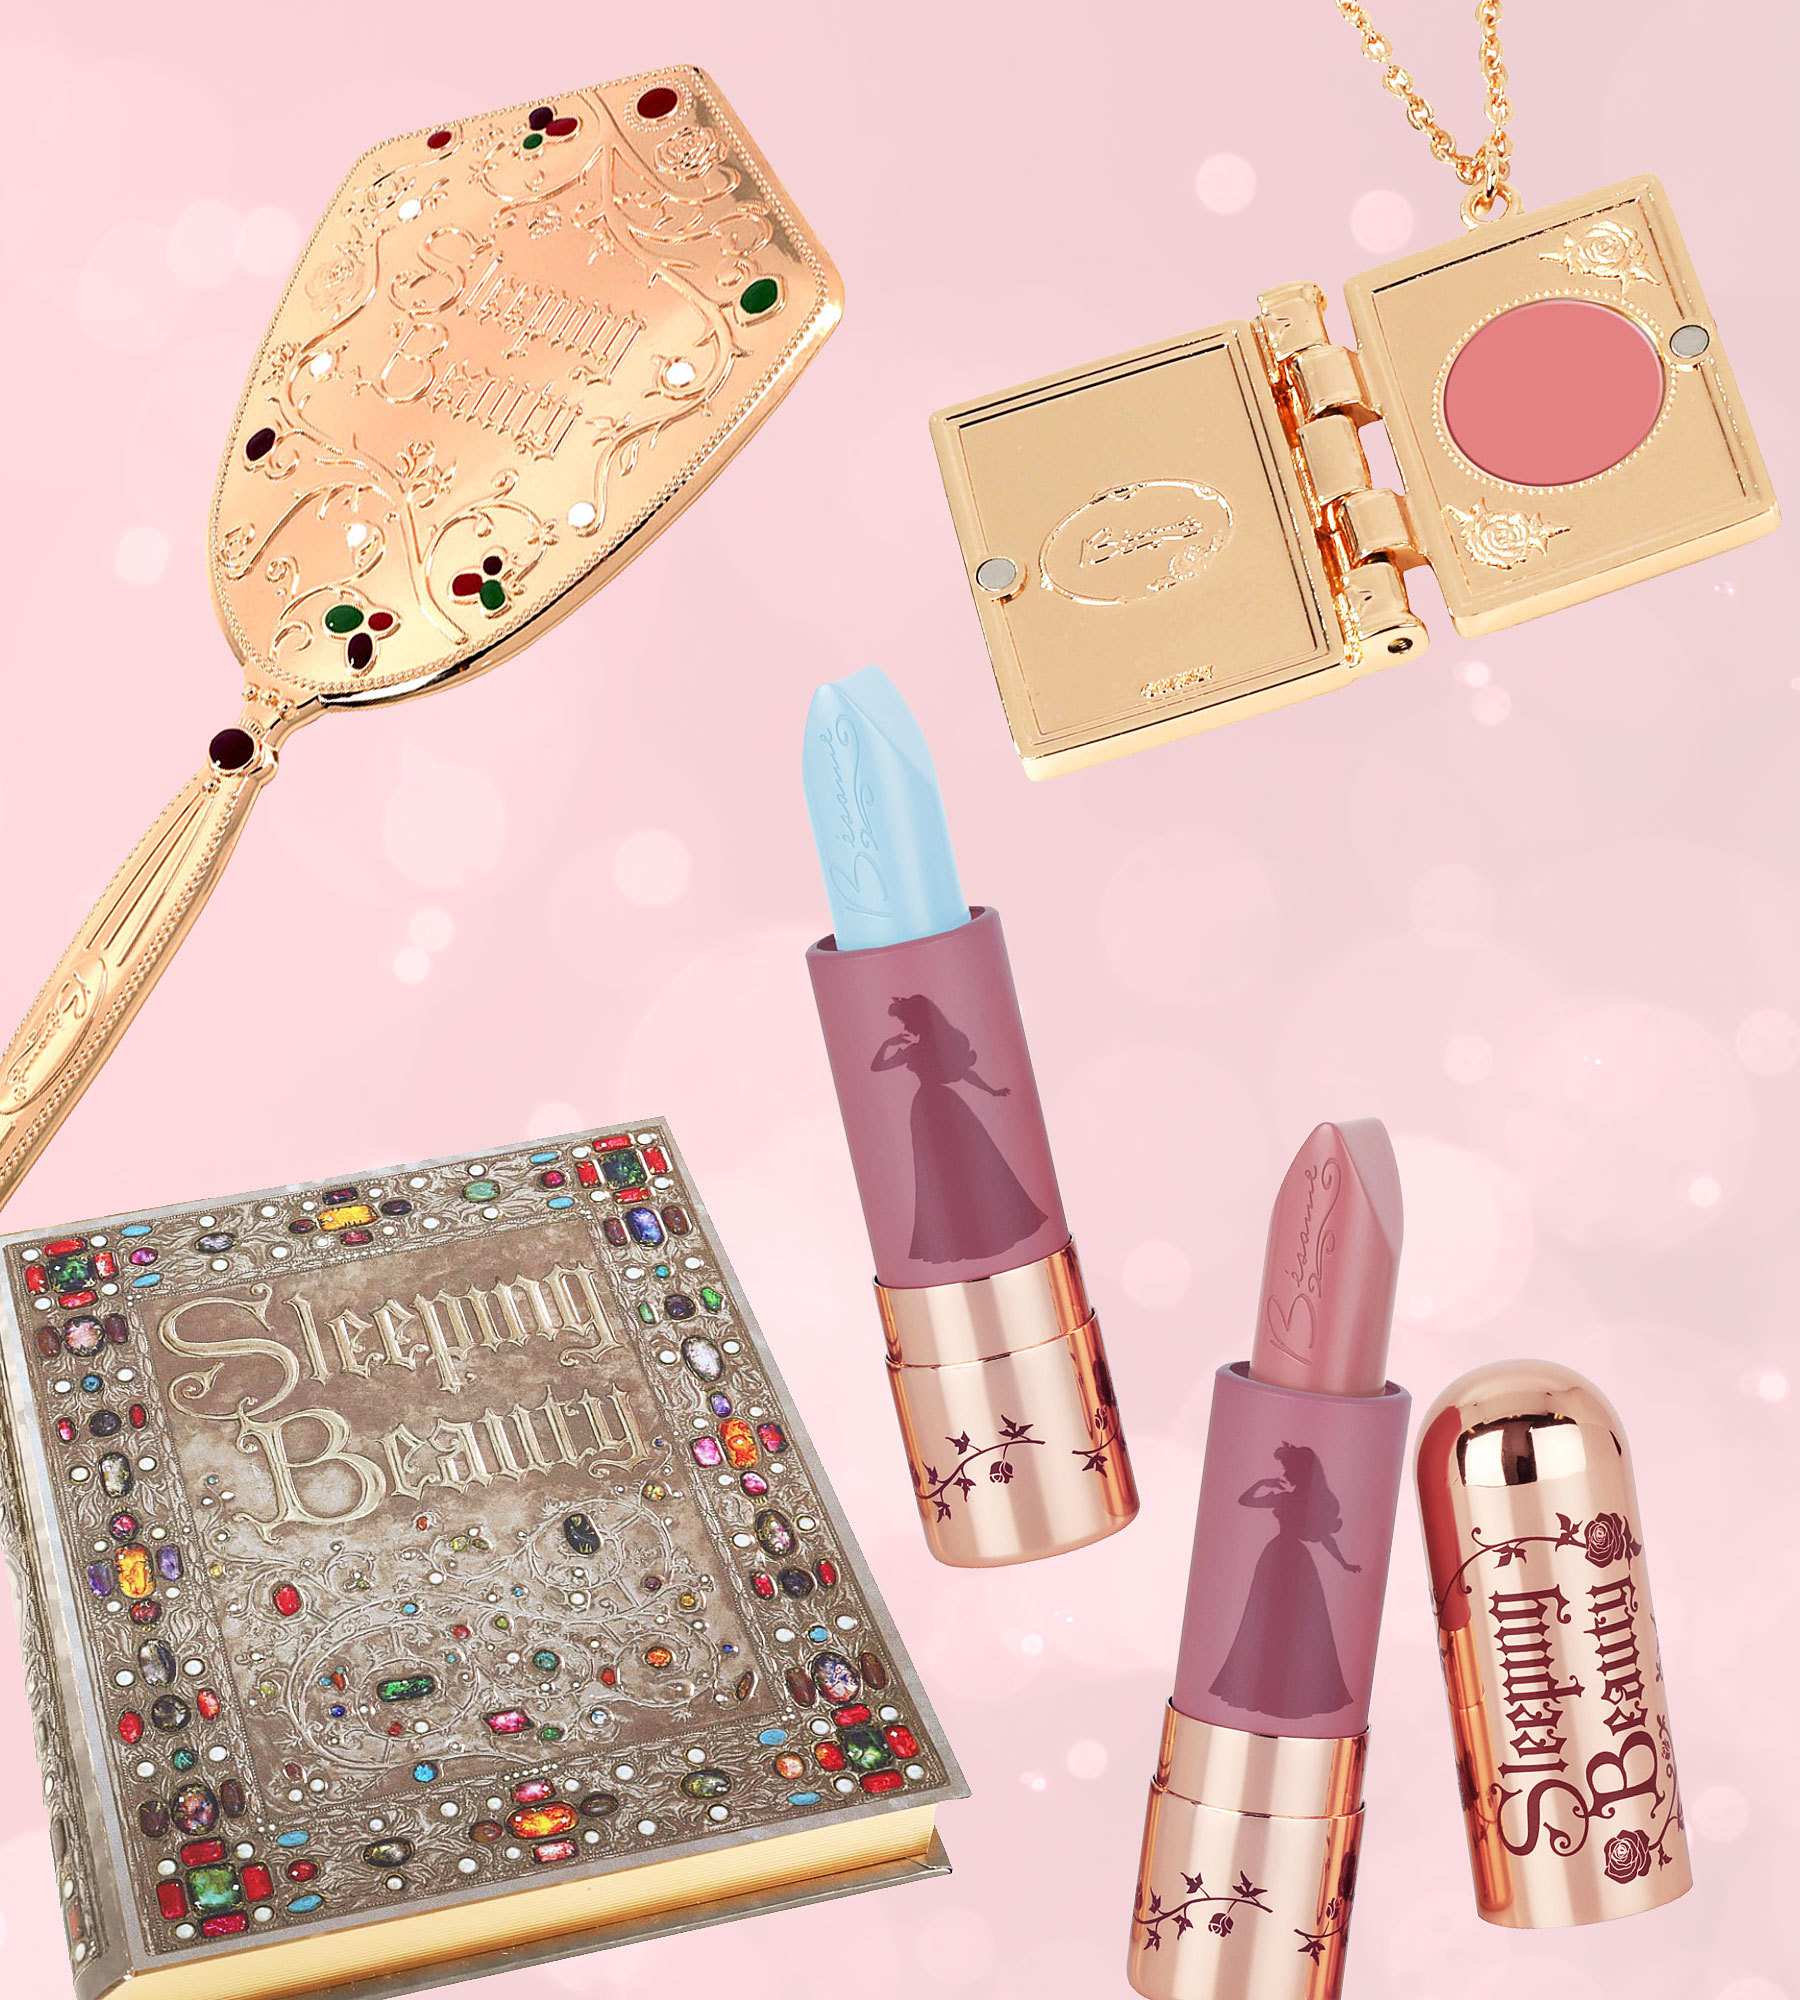 PHOTOS: A New Sleeping Beauty Collection Is Available Online NOW